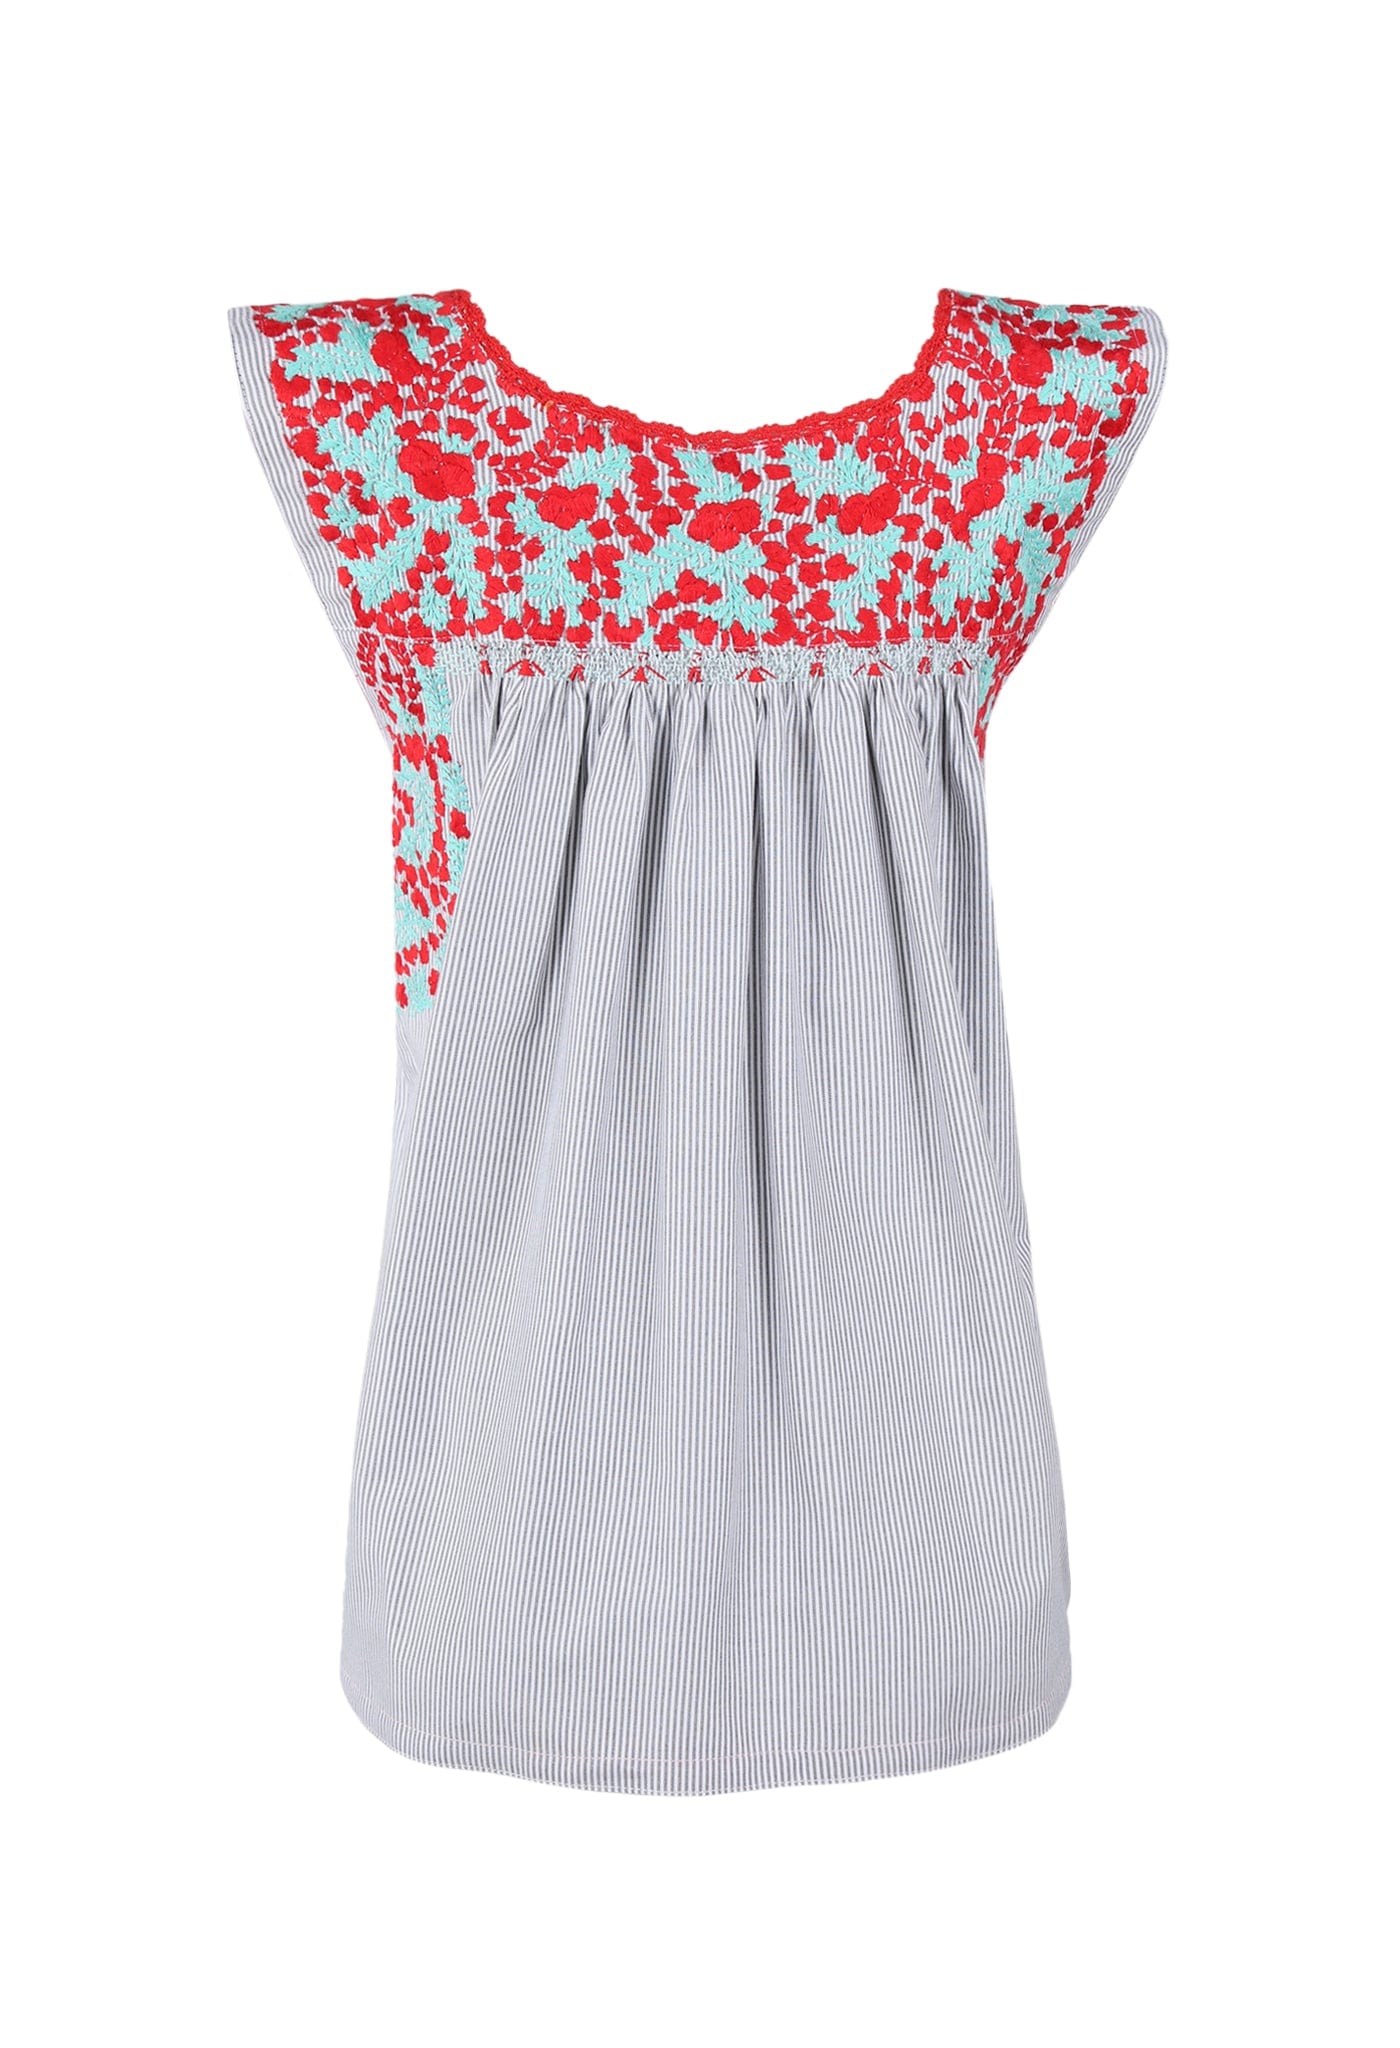 Flores Blouse Blouse Hoja Tomate y Menta